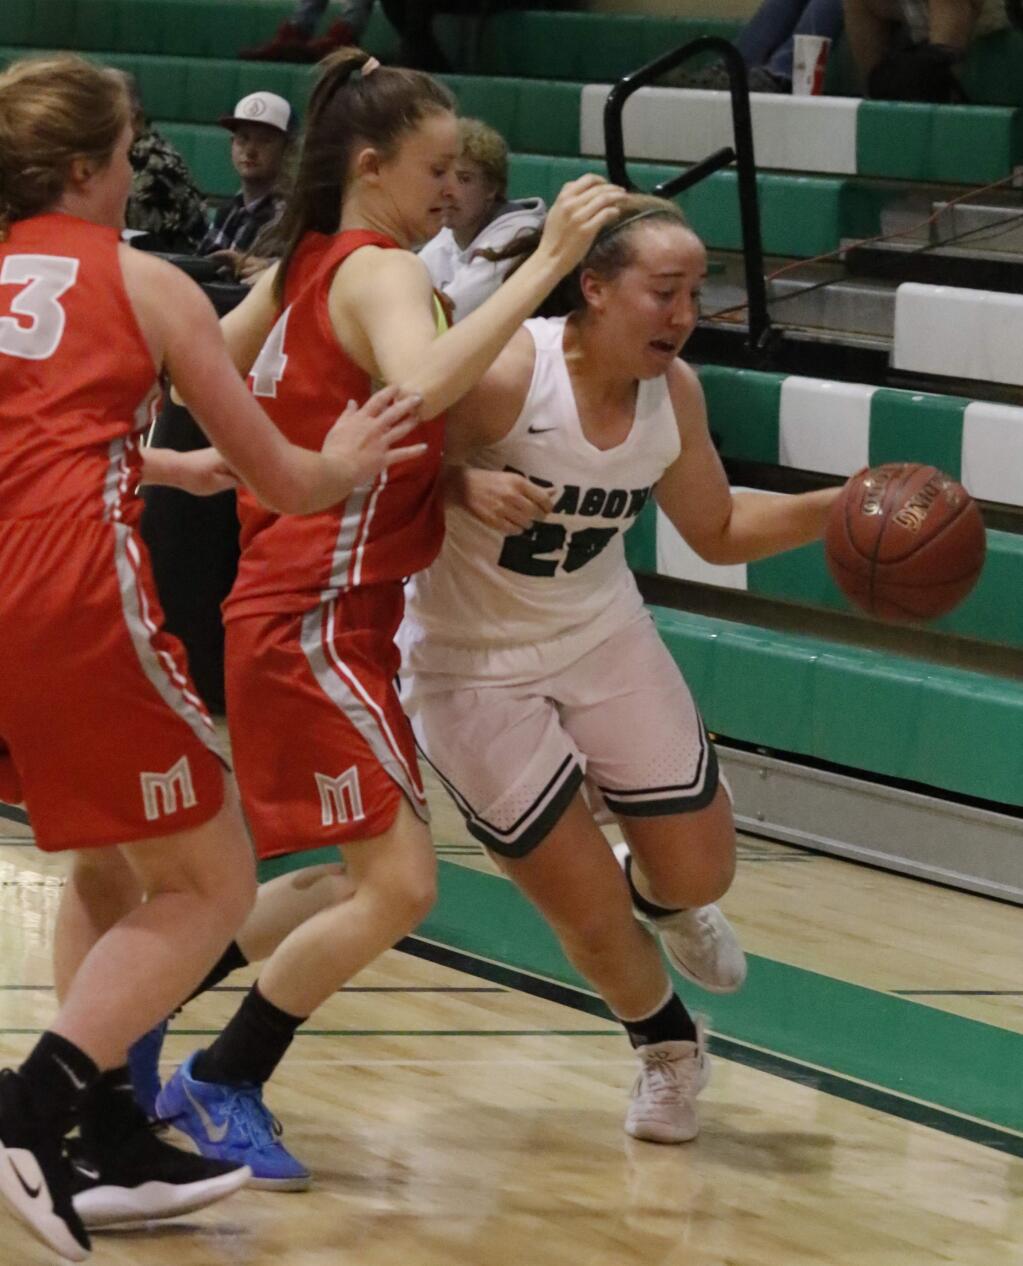 Bill Hoban/Special to the Index-TribuneSonoma's Kennedy Midgley drives to the basket during a recent game. Midgley was named to the all-tournament team at the Carrillo Tournament this past weekend.